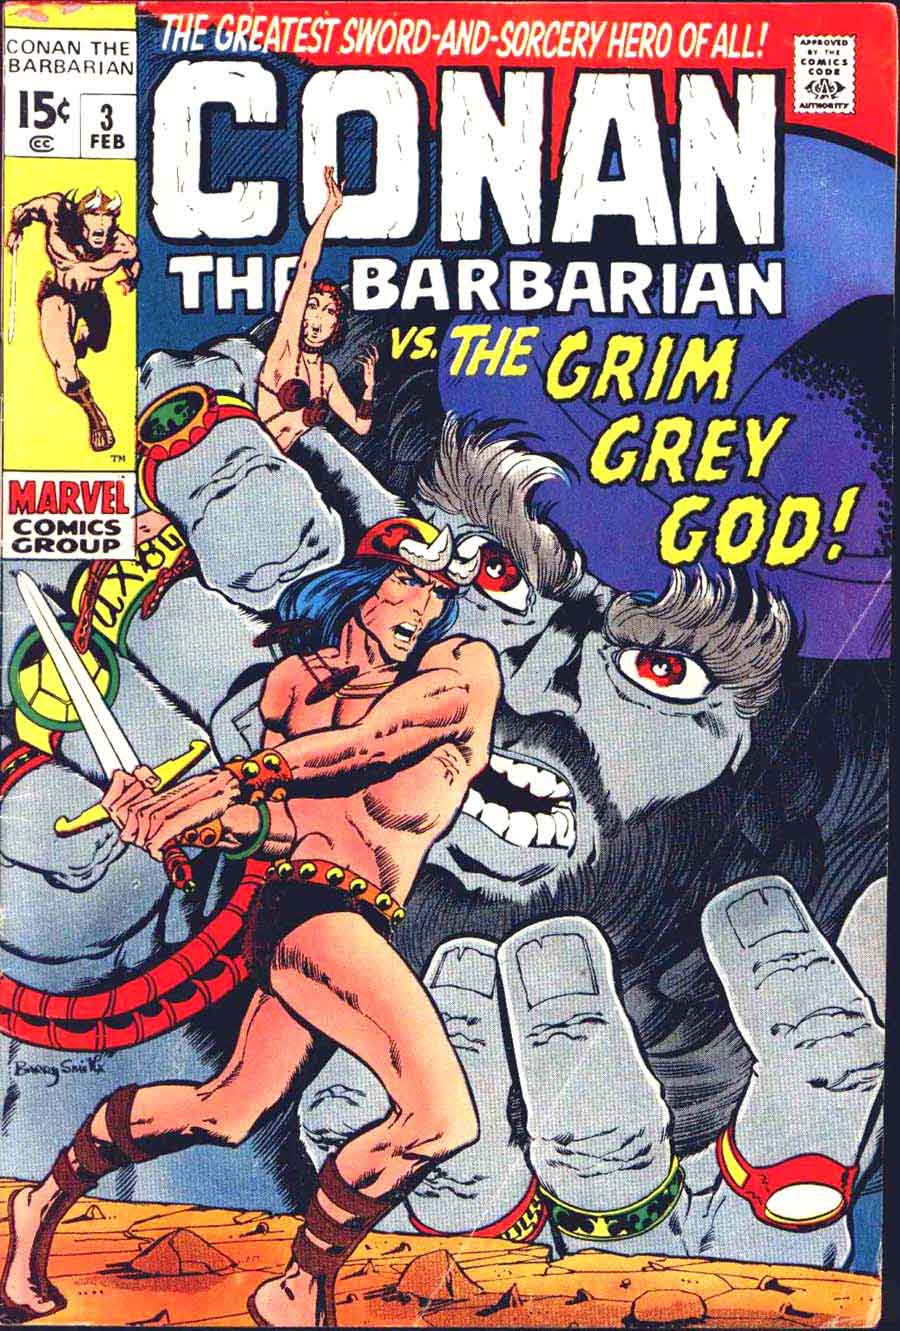 Conan the Barbarian v1 #3 marvel comic book cover art by Barry Windsor Smith